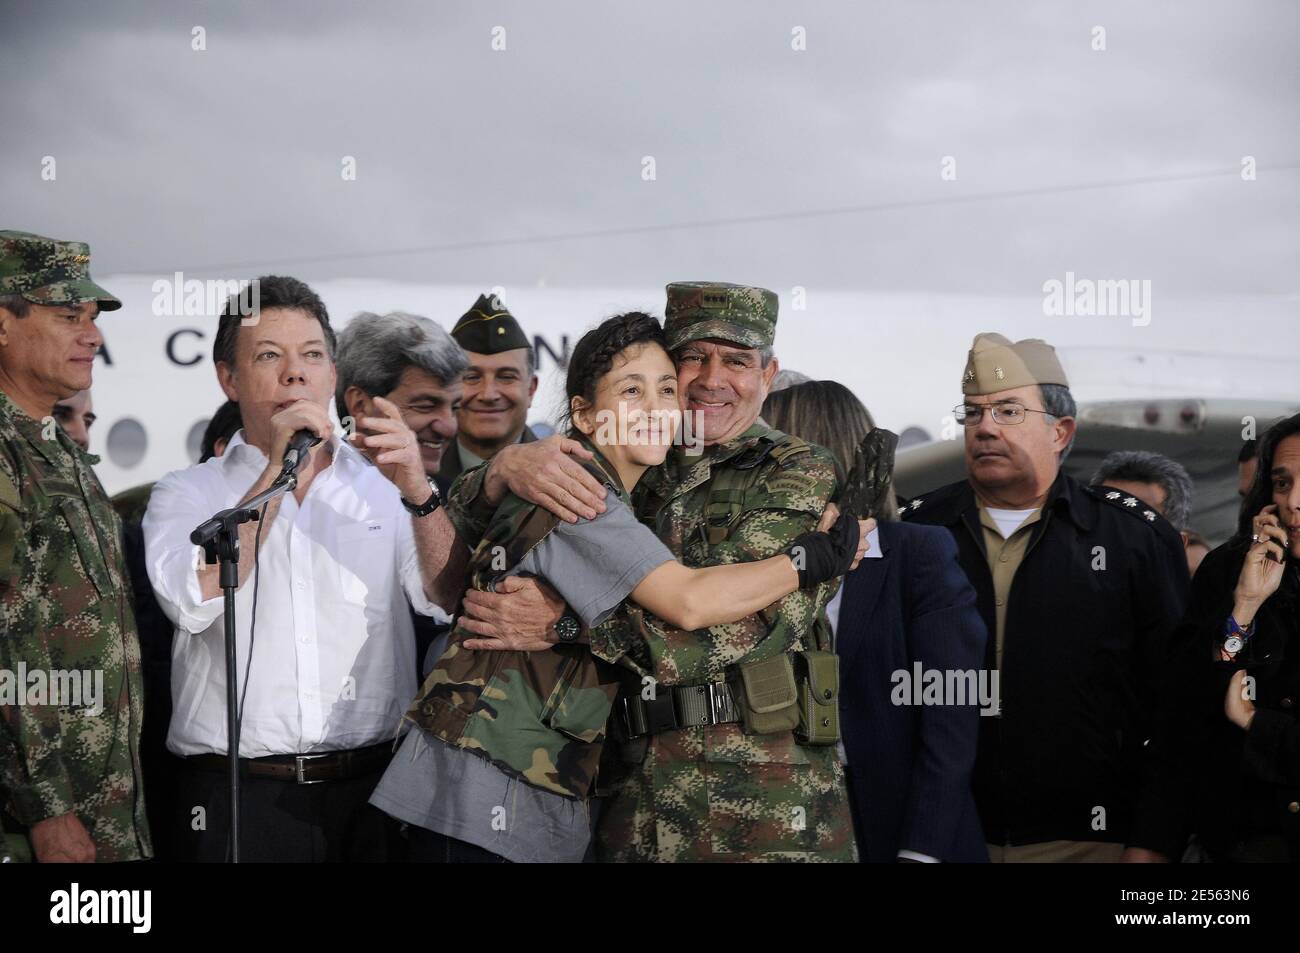 Colombia's Defense Minister Juan Manuel Santos spaking next to the commander of Colombia's Army, Gen. Mario Montoya, right, and former hostage Ingrid Betancourt as Defense Minister Juan Manuel Santos stands besides after Betancourt's arrival to a military base in Bogota, Colombia on July 2, 2008 after being rescued from six years of captivity. Betancourt is one of 15 hostages rescued by Colombia's military from the Revolutionary Armed Forces of Colombia, or FARC. Photo by Reina/ABACAPRESS.COM Stock Photo